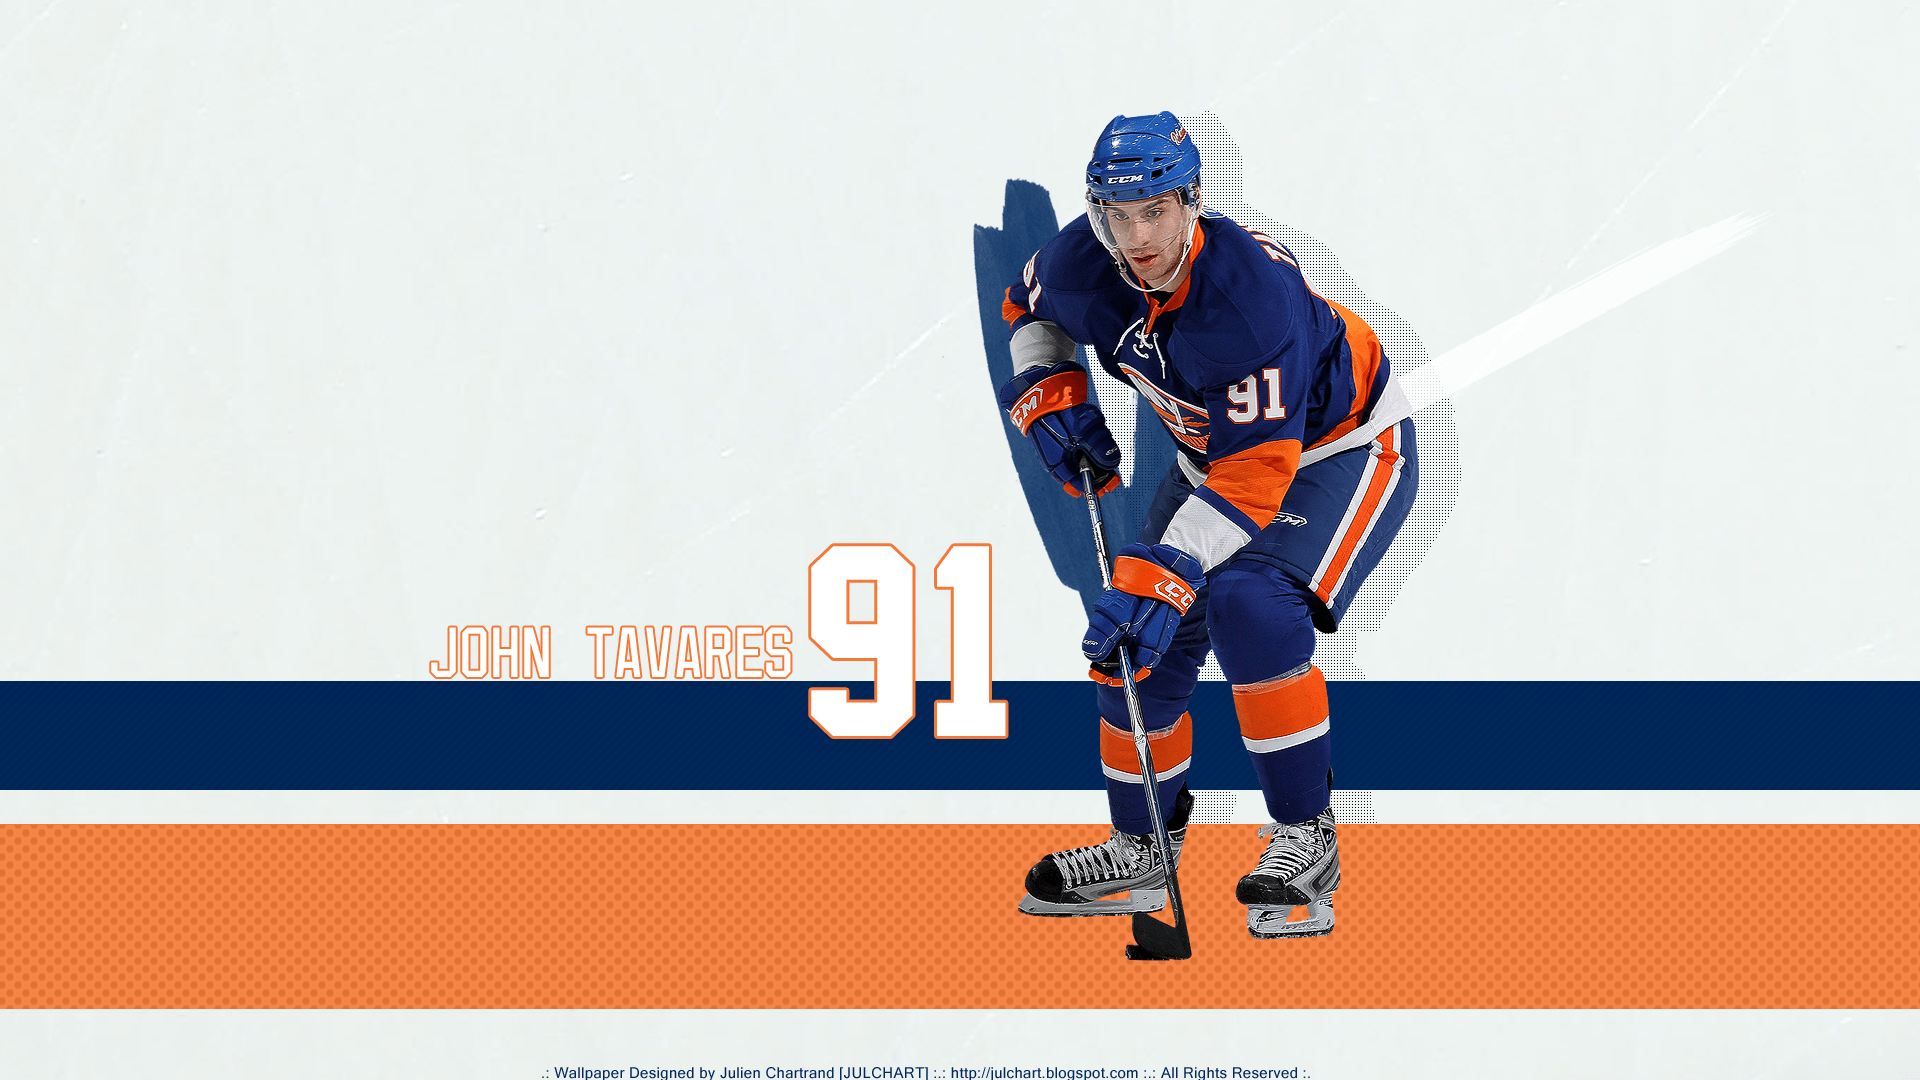 NHL player John Tavares wallpaper and image, picture